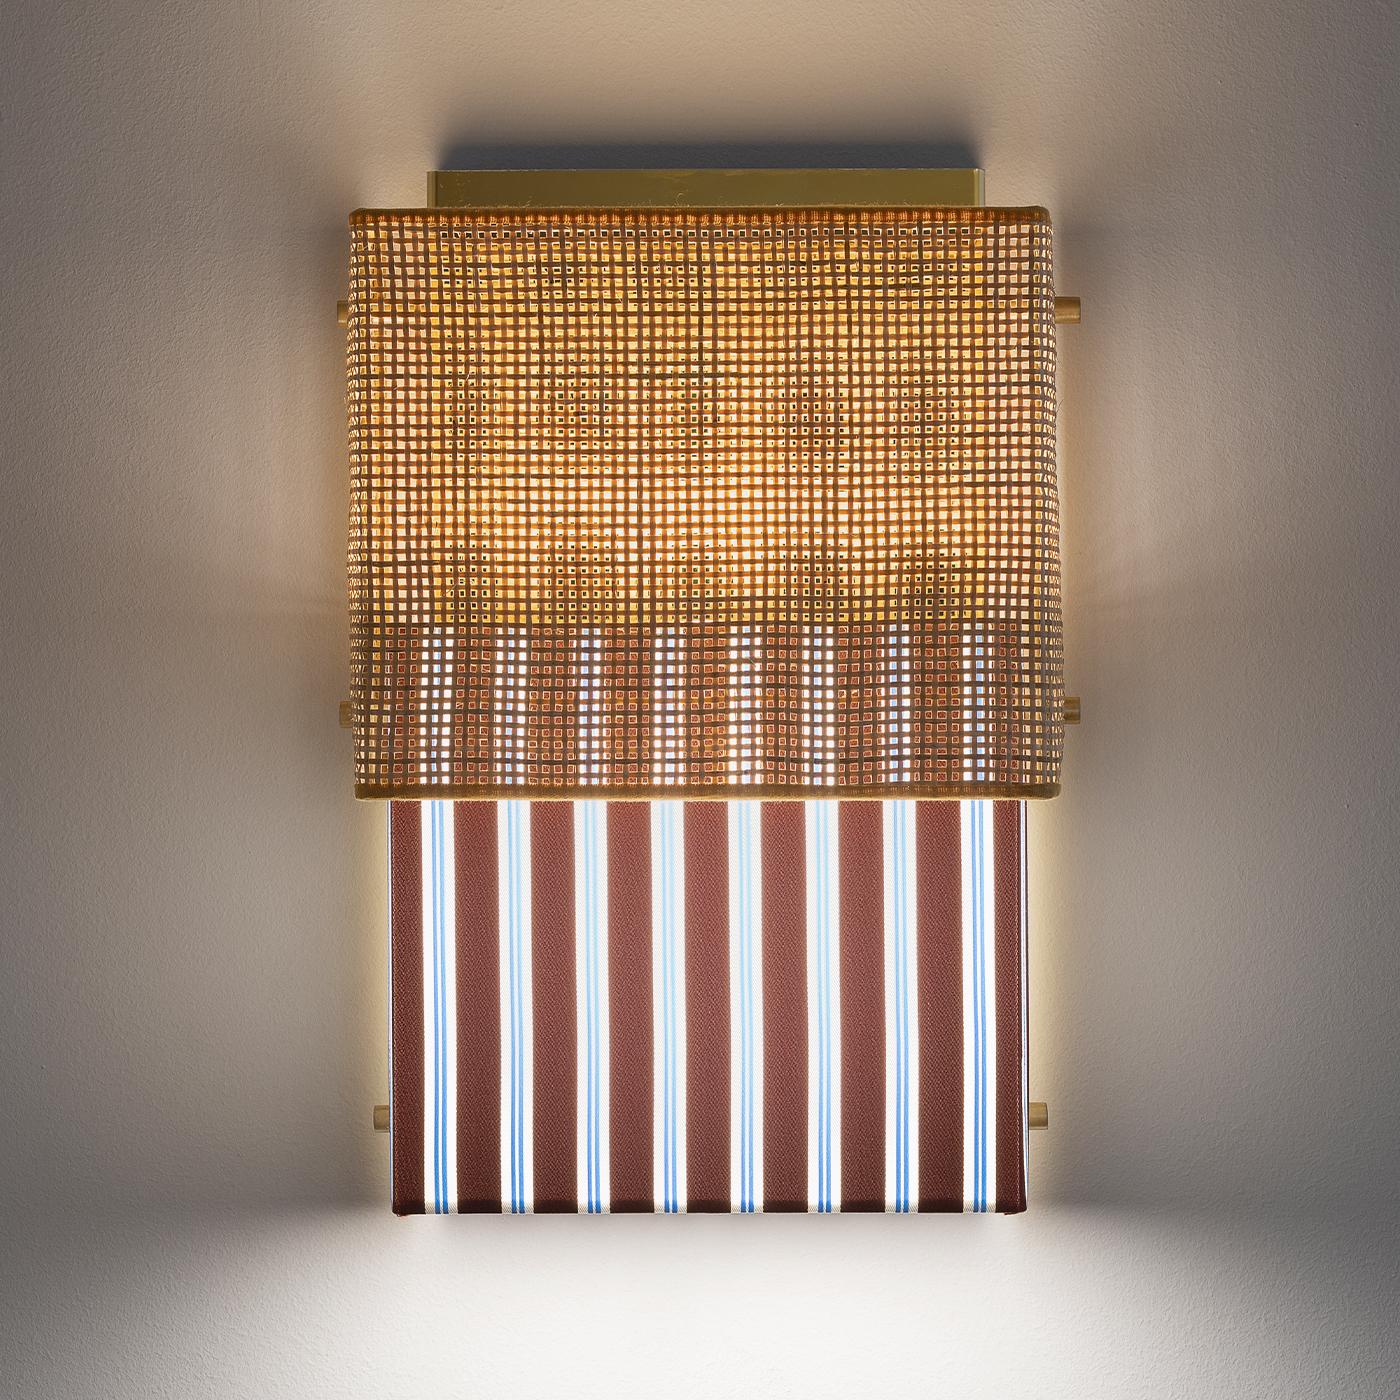 One of the most iconic designs of the 20th century is the bikini; this famous style inspired this mounted wall lamp made from two pieces of fabric. An upper part in rattan sits above rust-colored, striped Trevira fabric from the Milan-based textiles